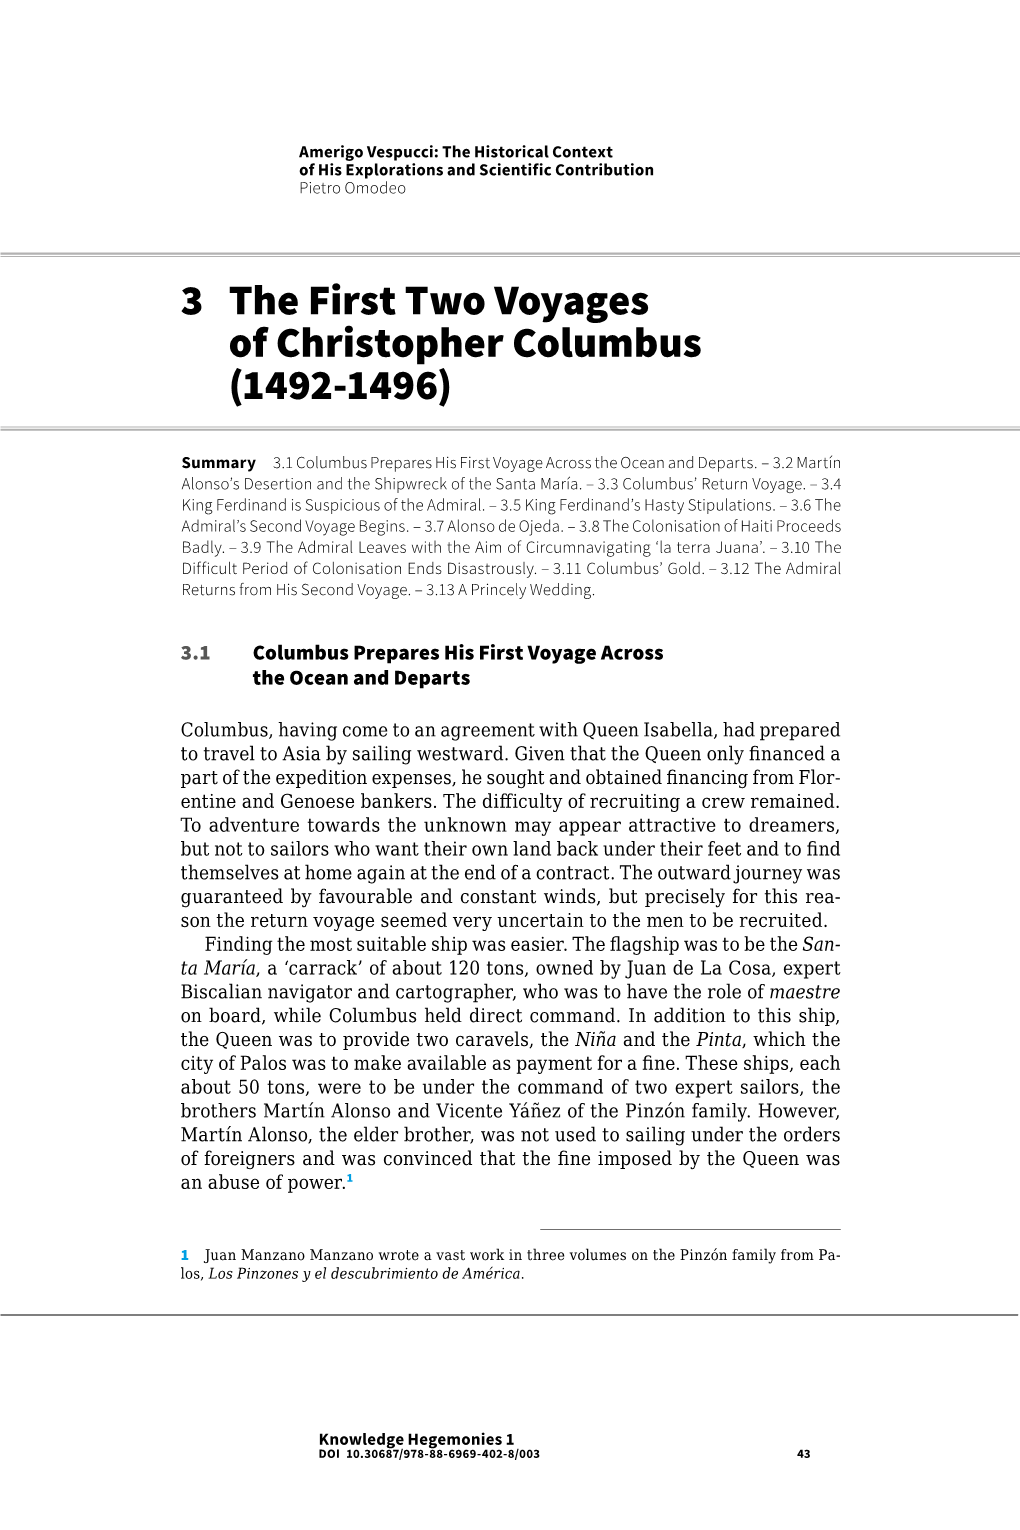 3 the First Two Voyages of Christopher Columbus (1492-1496)